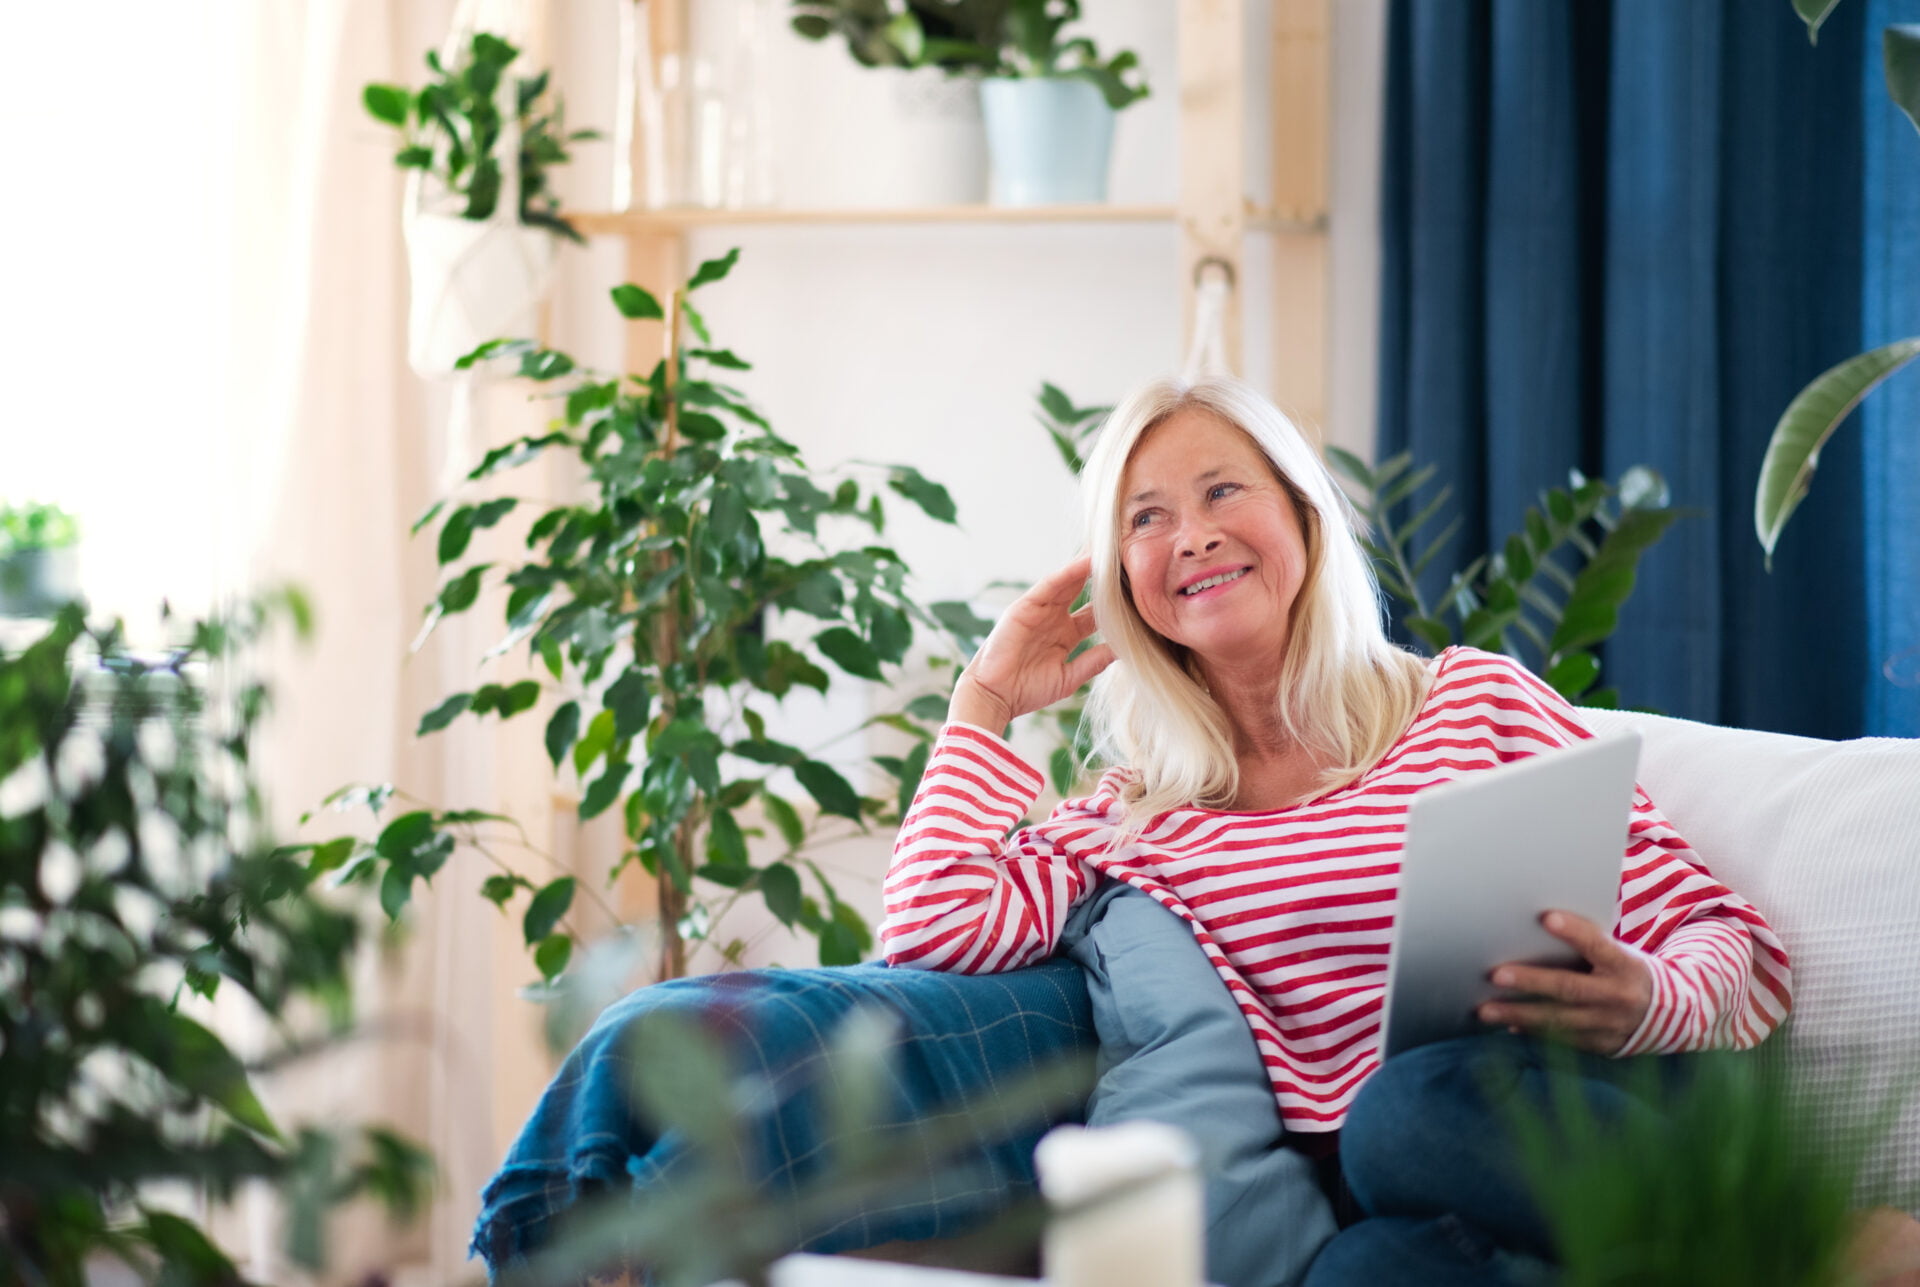 Woman sitting on couch surrounded by plants and clean indoor air